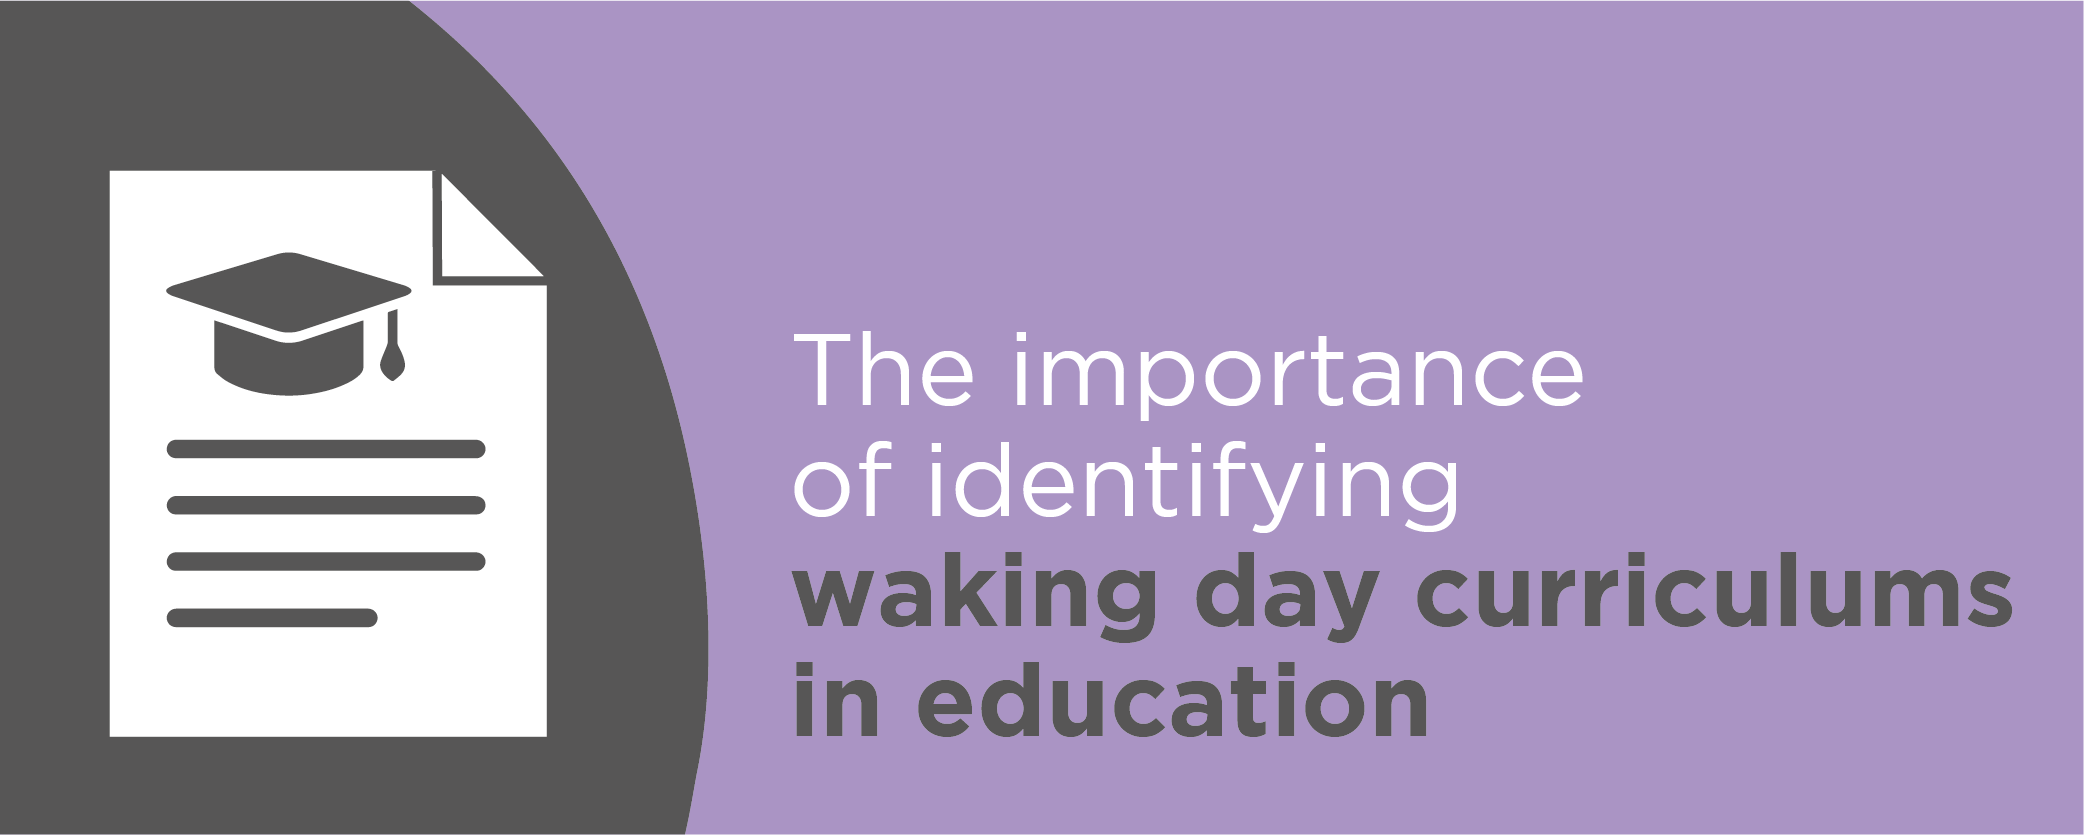 The importance of identifying waking day curriculums in education